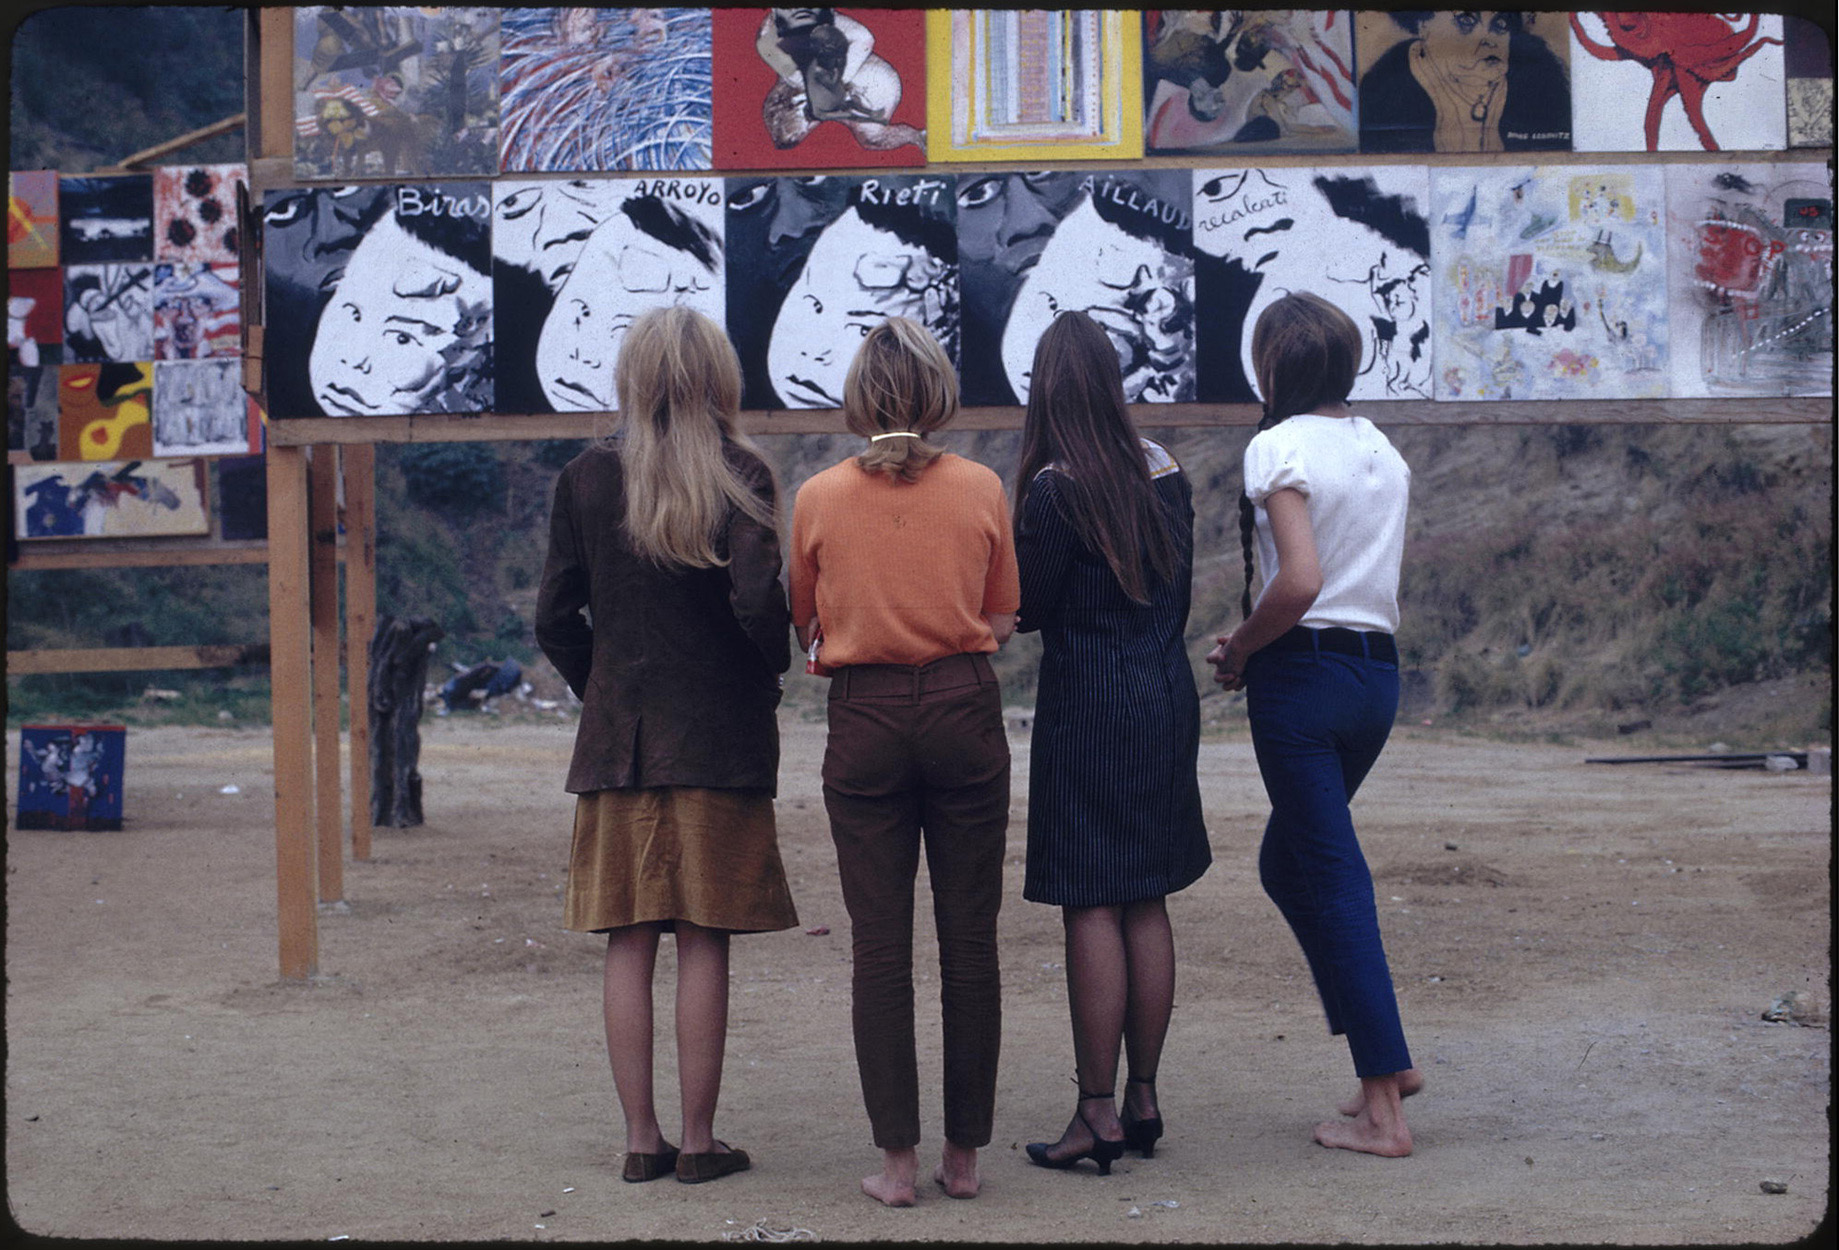 Four women looking at art work at the <i>The Artists’ Tower of Protest</i>, 1966. Charles Brittin Archive, The Getty Research Institute, Los Angeles, (2005.M.11). Photo: Charles Brittin. © J. Paul Getty Trust.